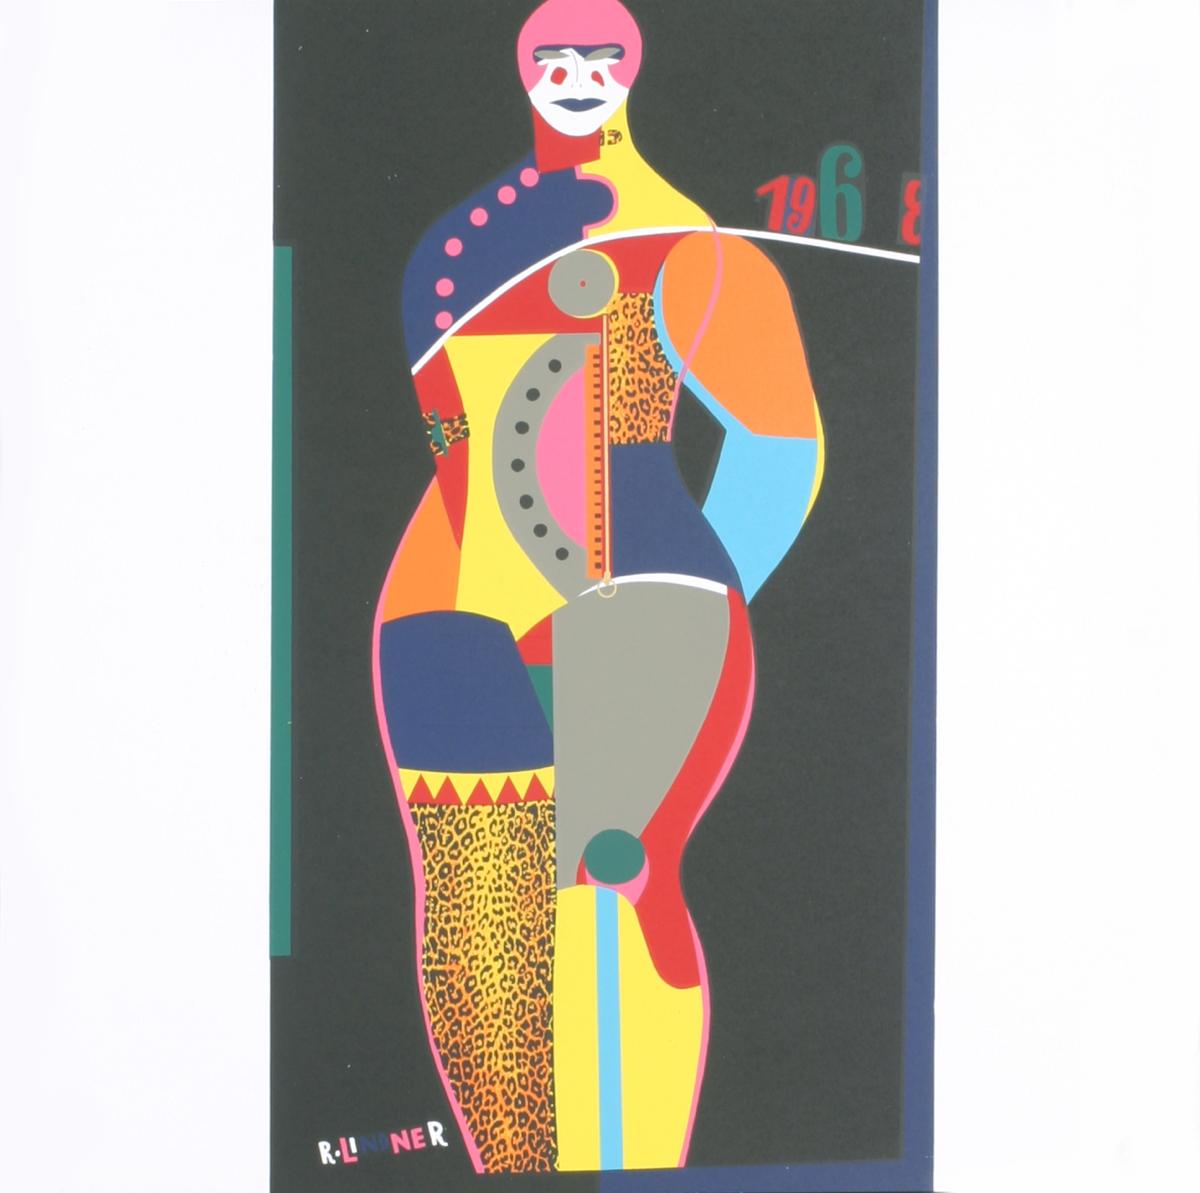 First edition hand-pulled serigraph unsigned and not numbered by Richard Lindner in 1968. Part of a collection produced by Multiples and printed by Banner. Other artists that participated in the portfolio are Warhol (Soup can), Lichtenstein (Hand